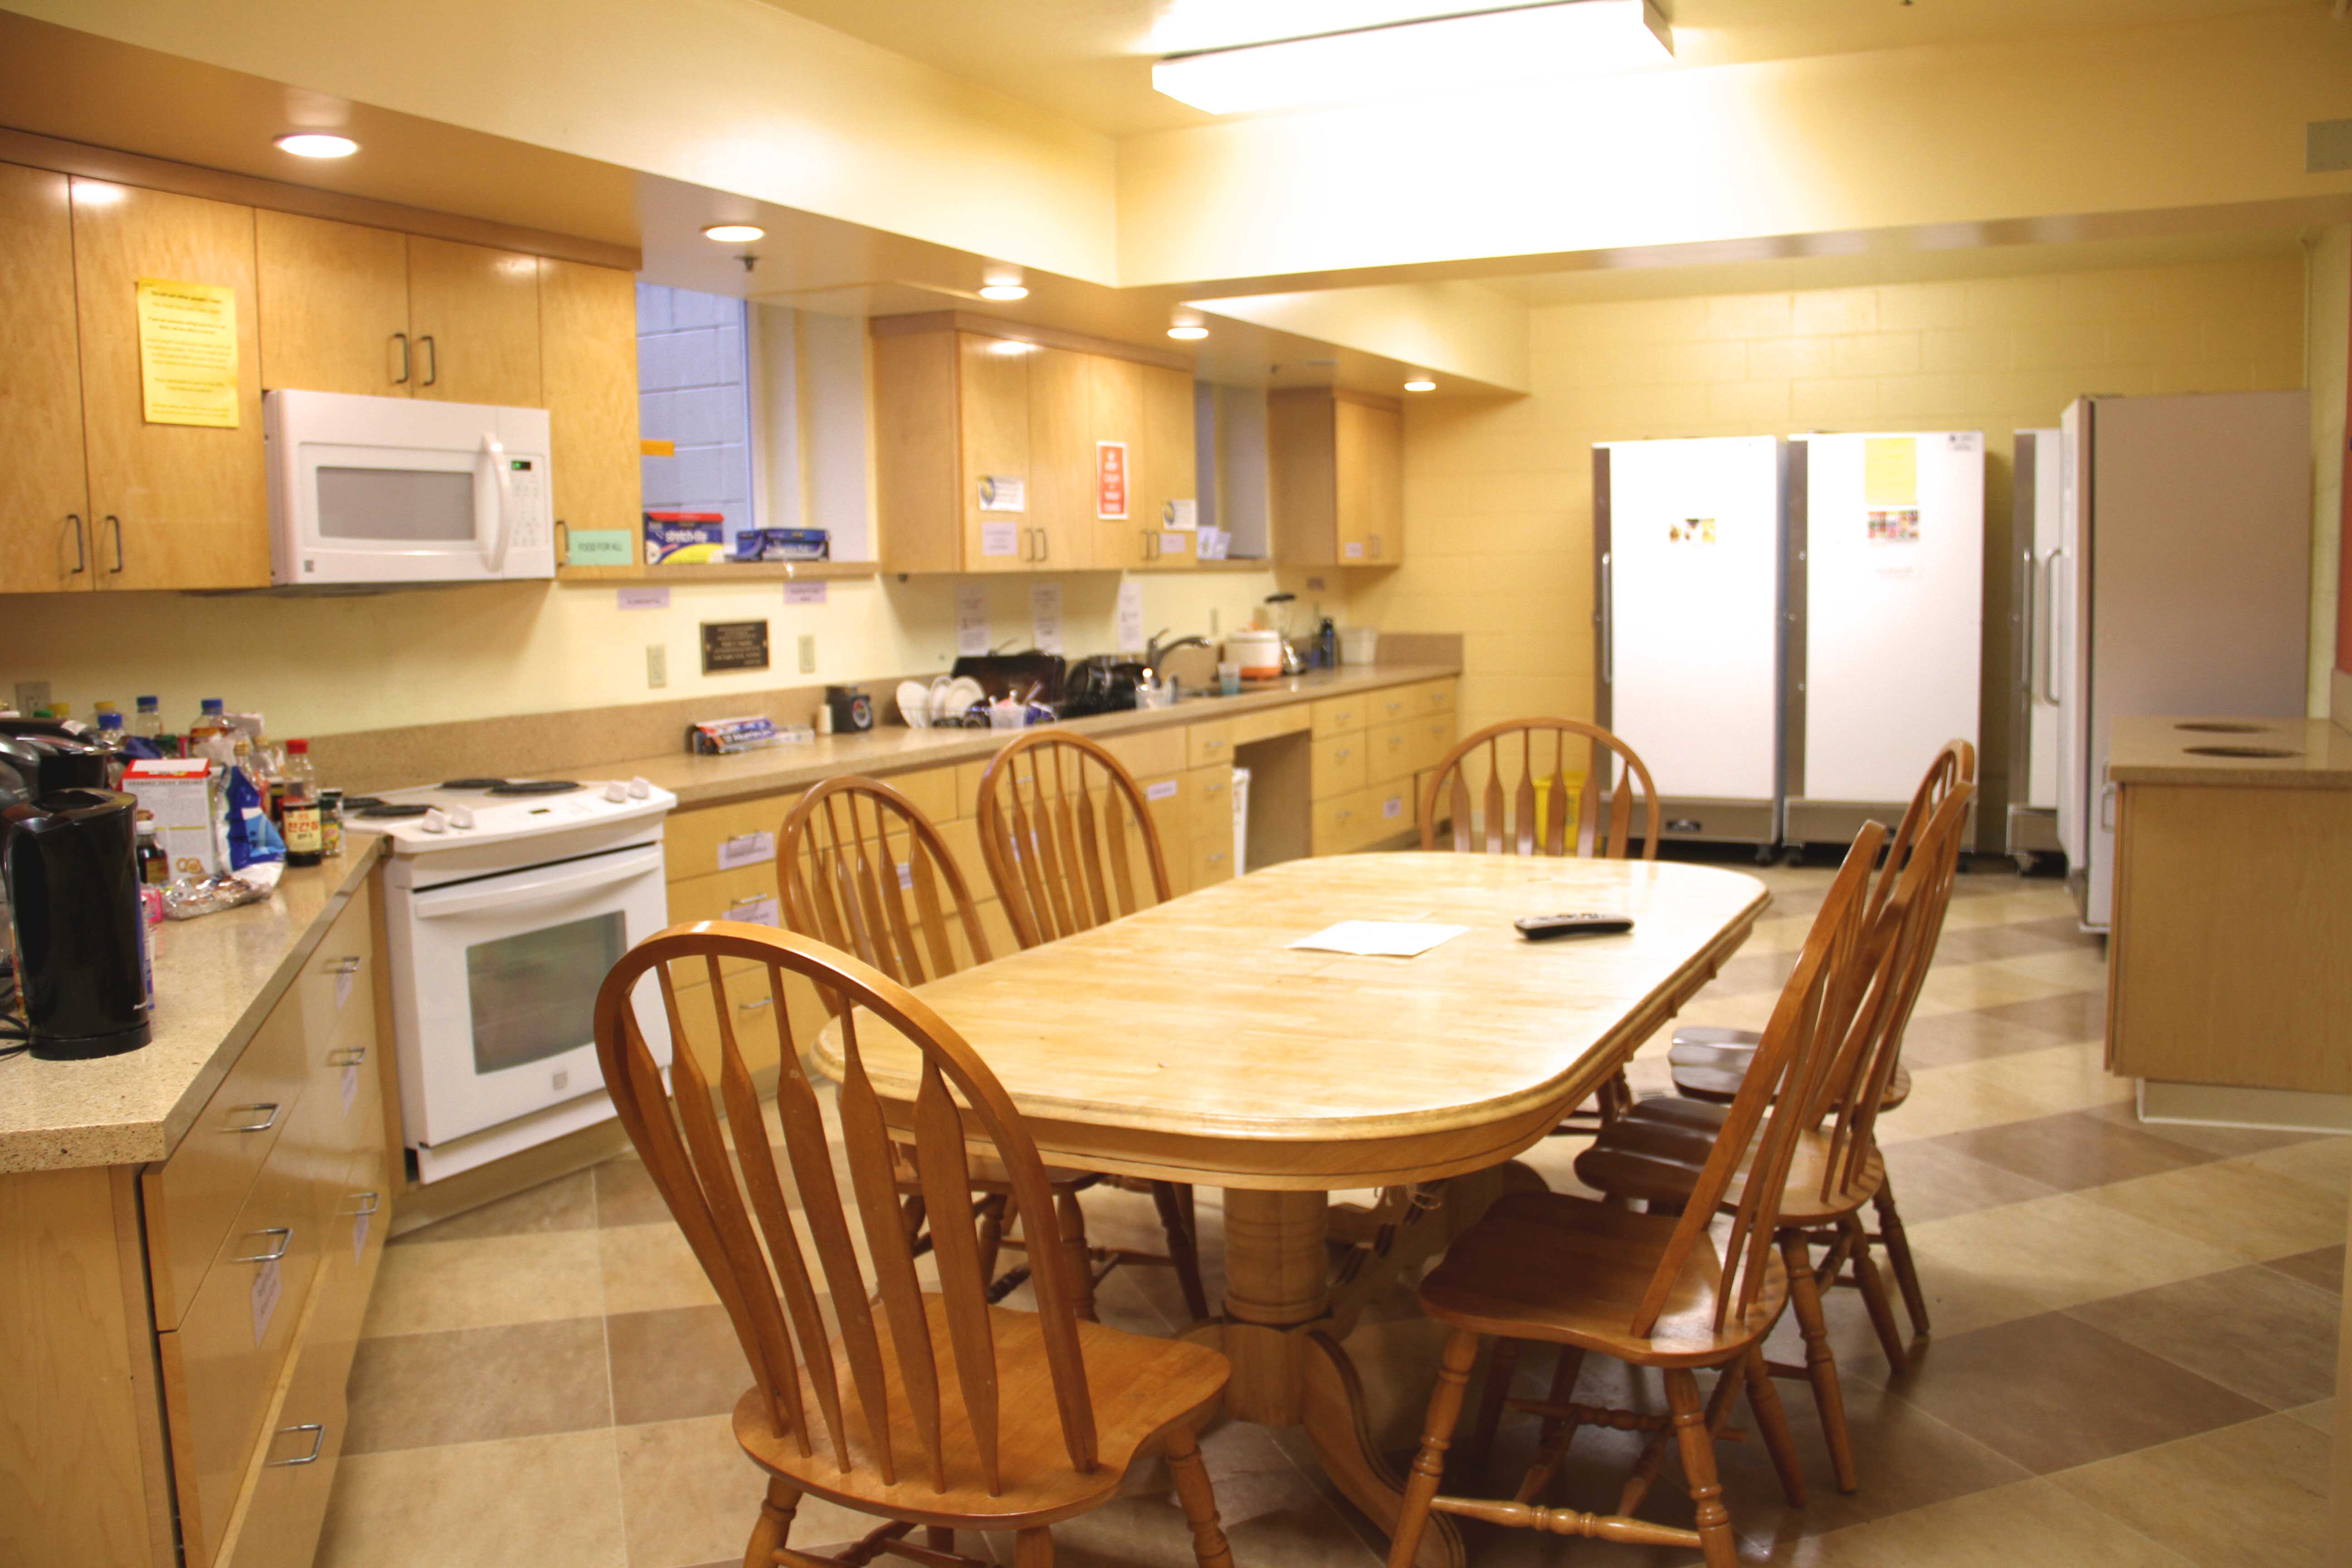 Facilities in Student Kitchen